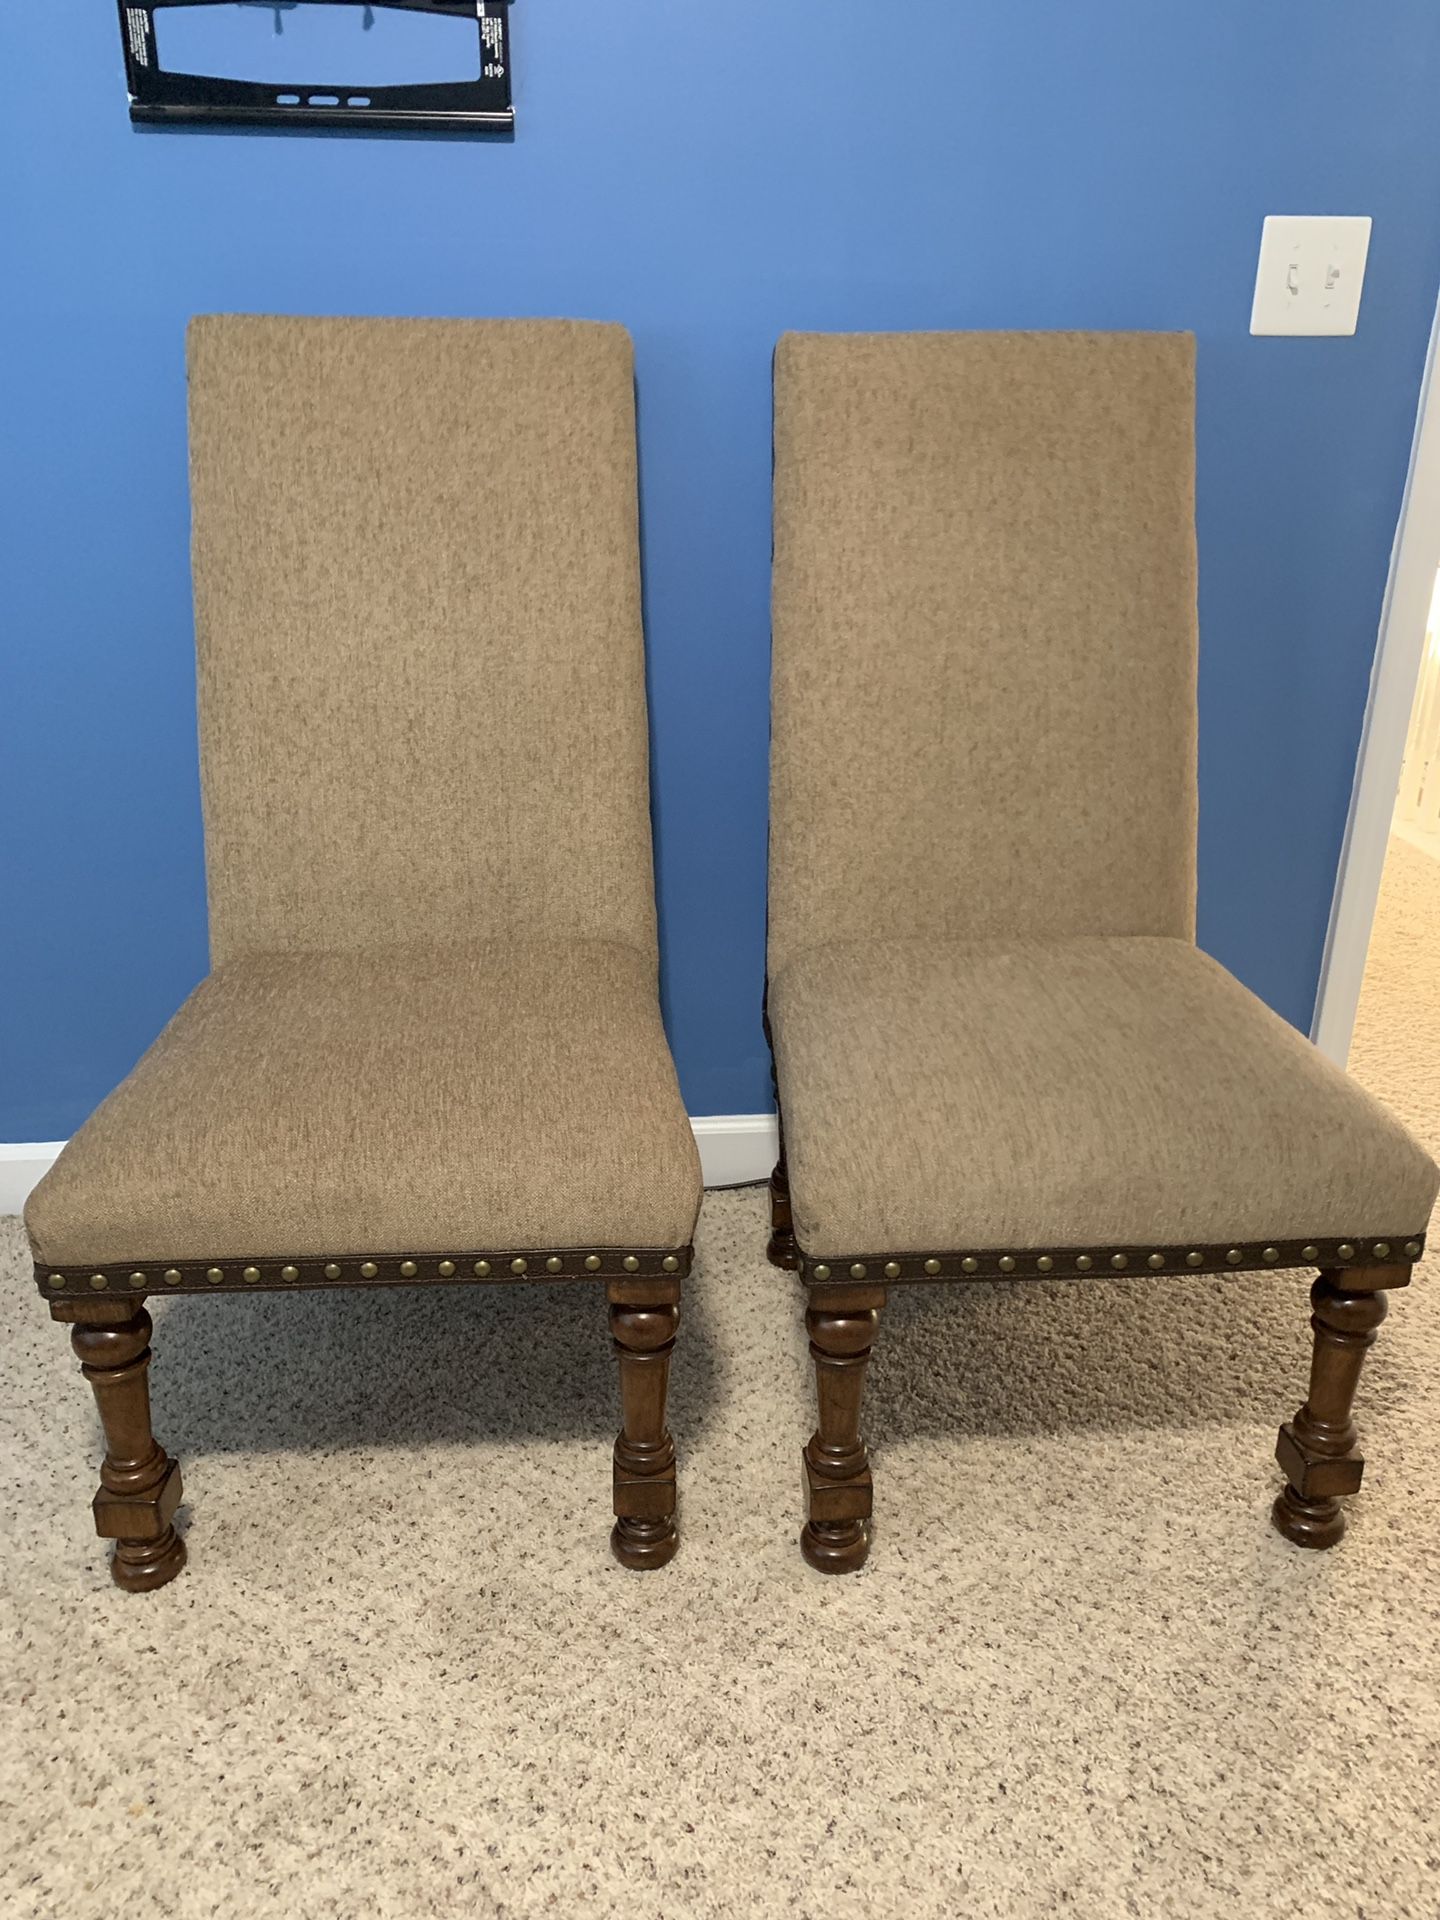 Decorative armless chairs. Guest room/entry way.